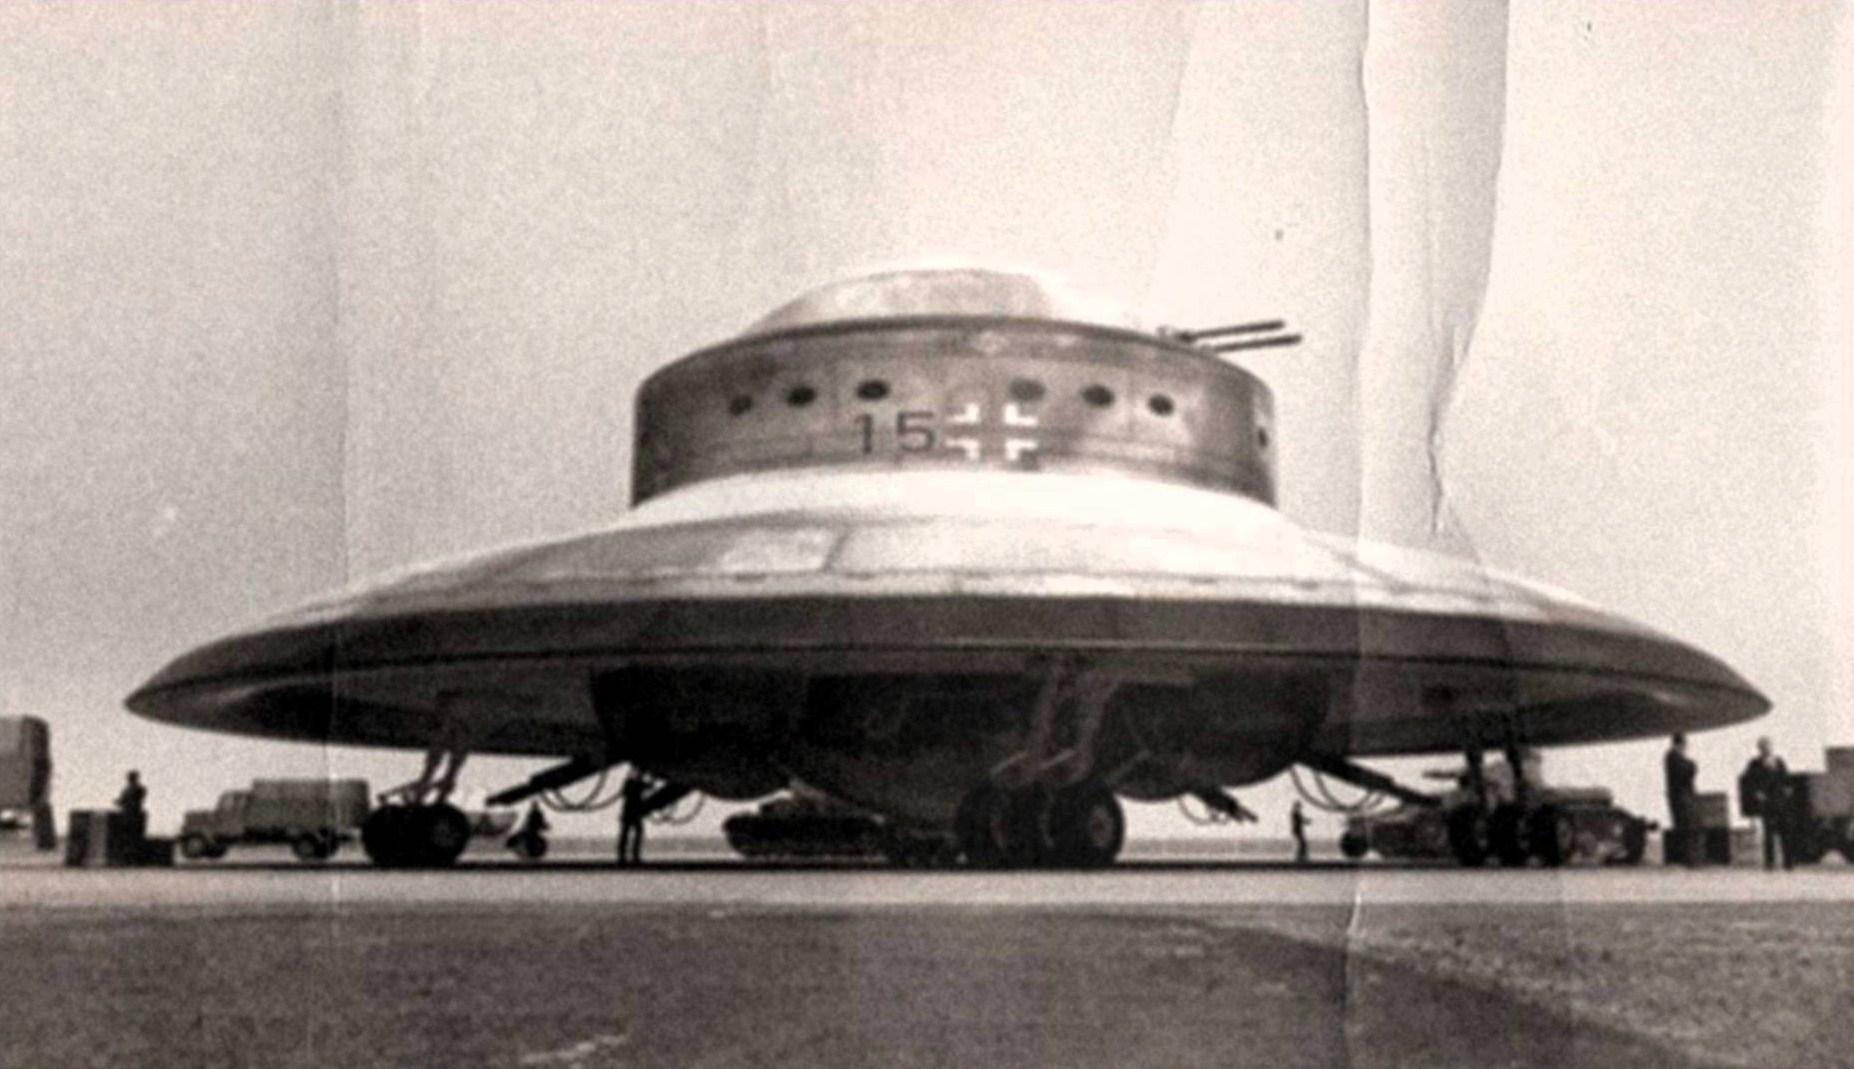 A photograph of one of the Nazi's prototype disc-shaped aircraft.